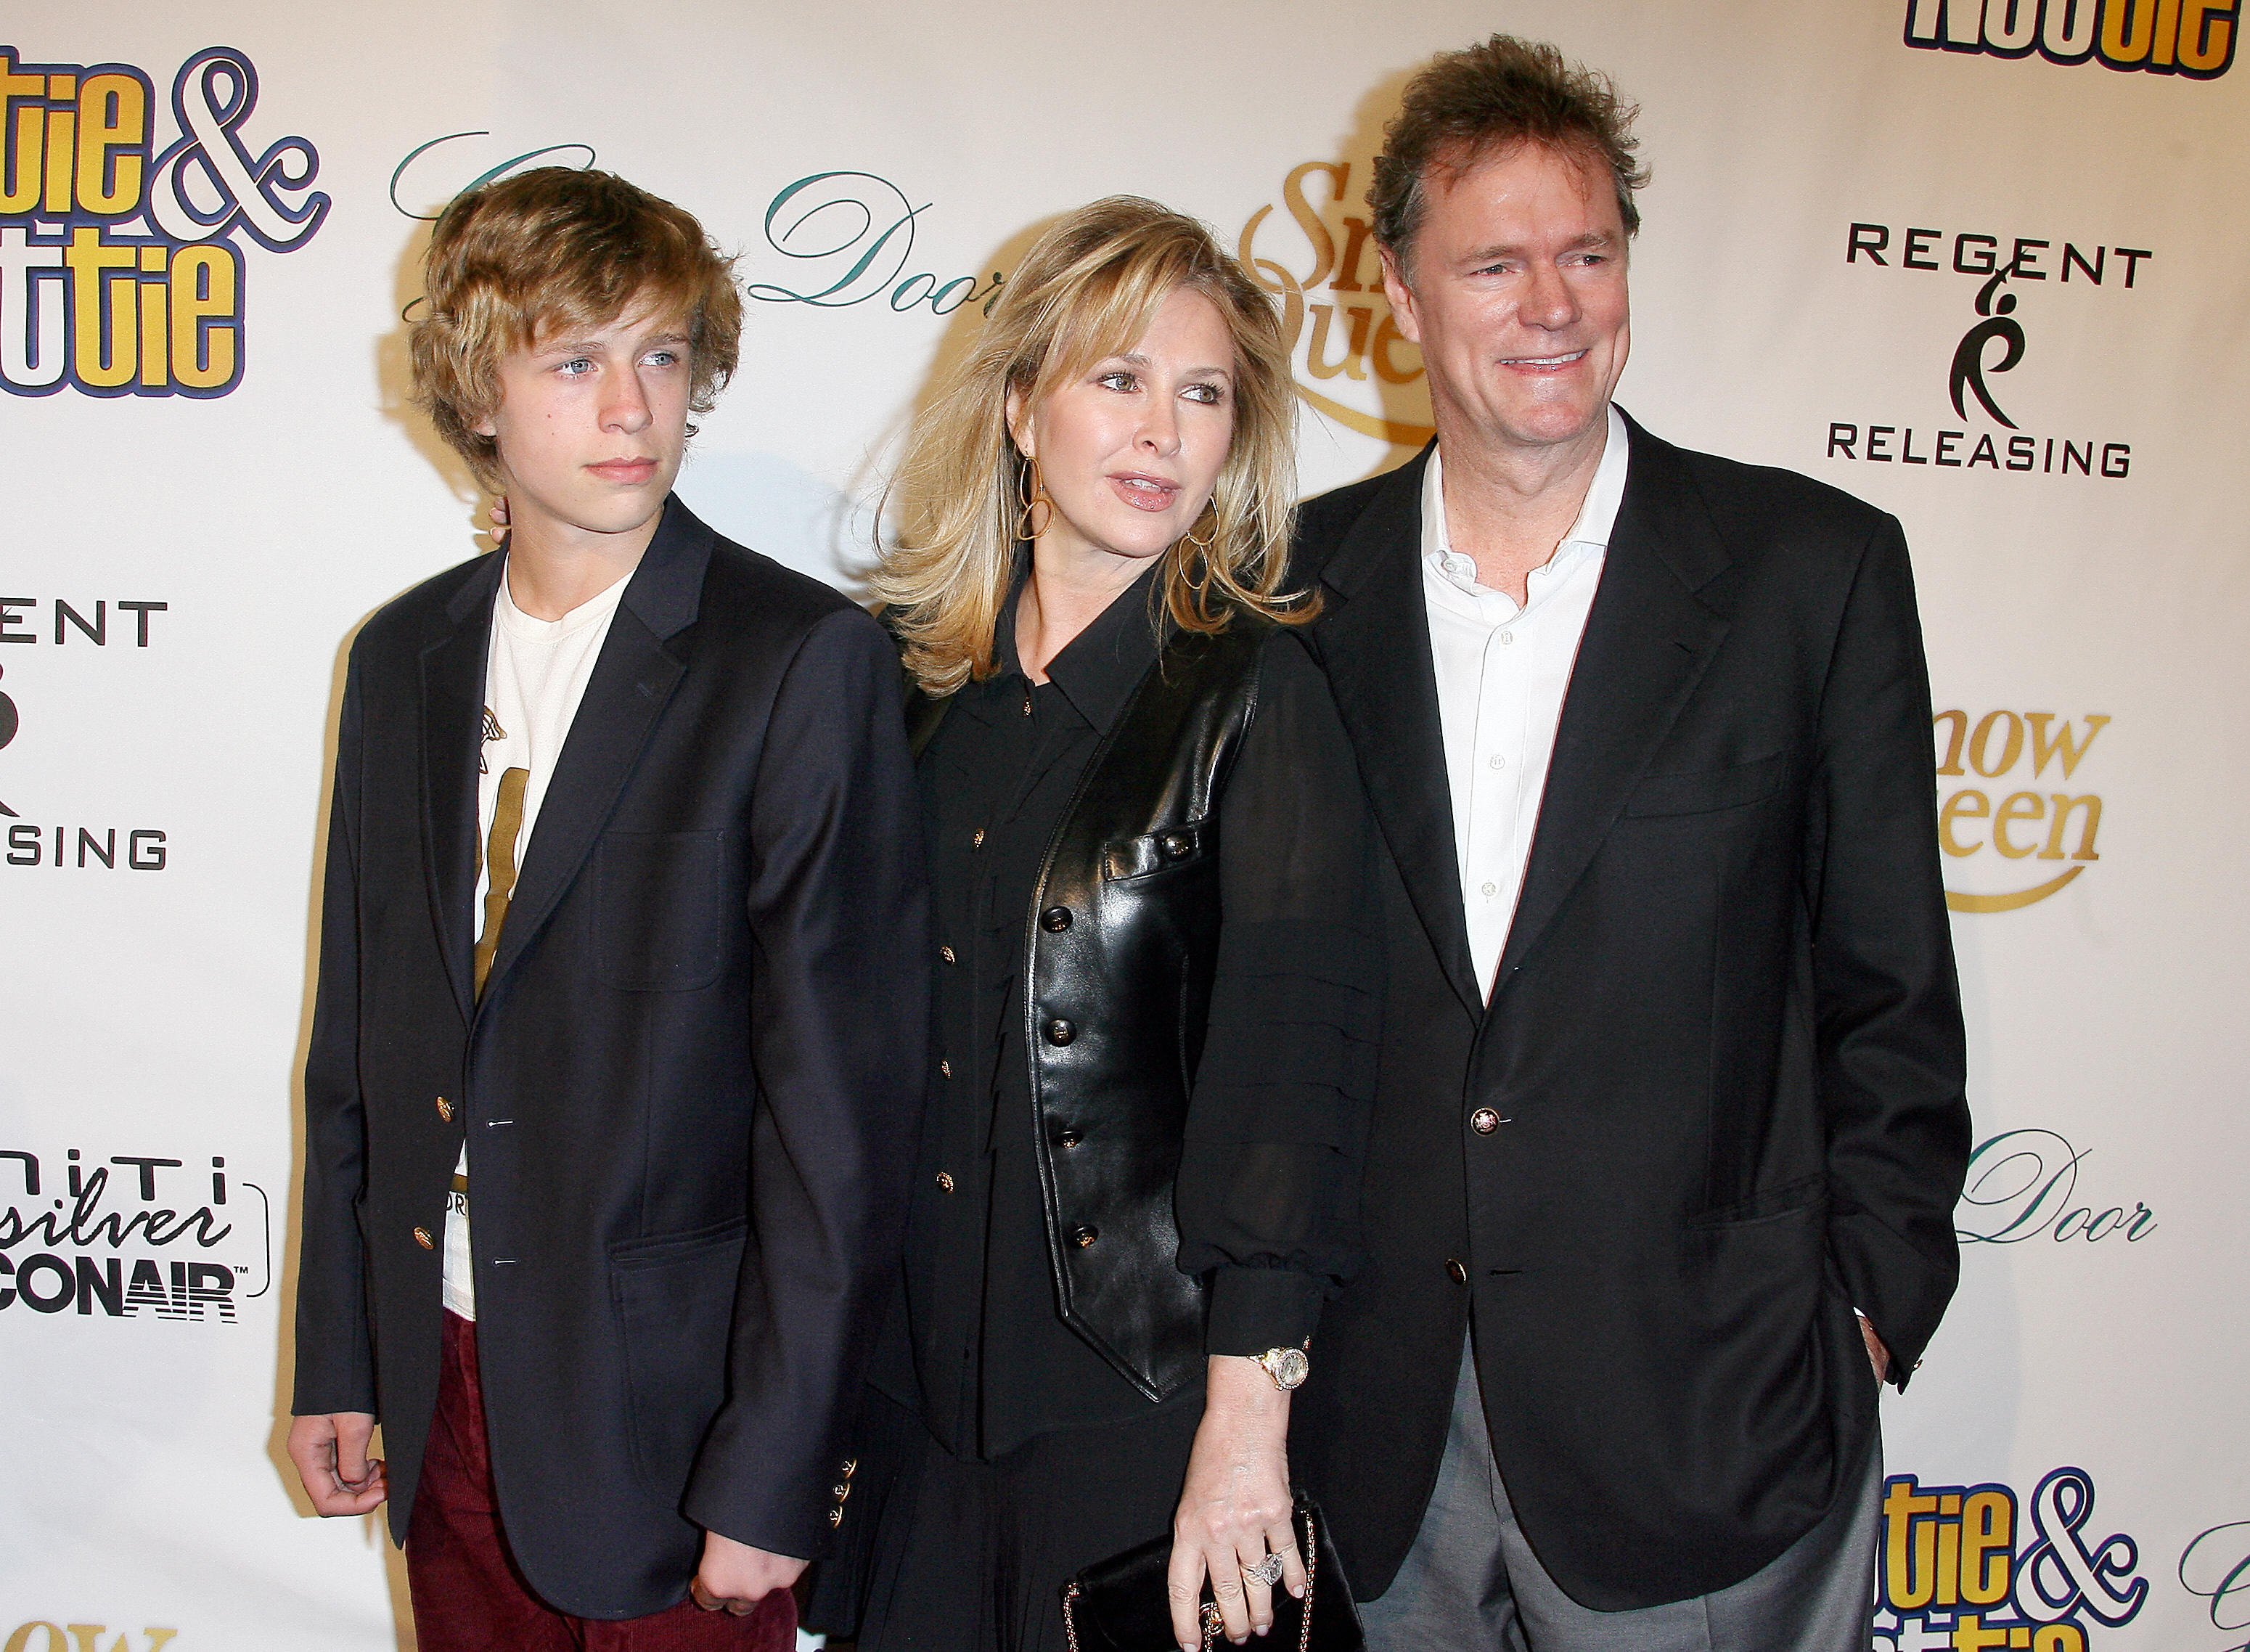 Conrad Hughes Hilton, Kathy Hilton and Rick Hilton arrive at the Premiere of "The Hottie and The Nottie," on February 4, 2008 at the Egyptian Theater in Los Angeles, California. | Source: Getty Images